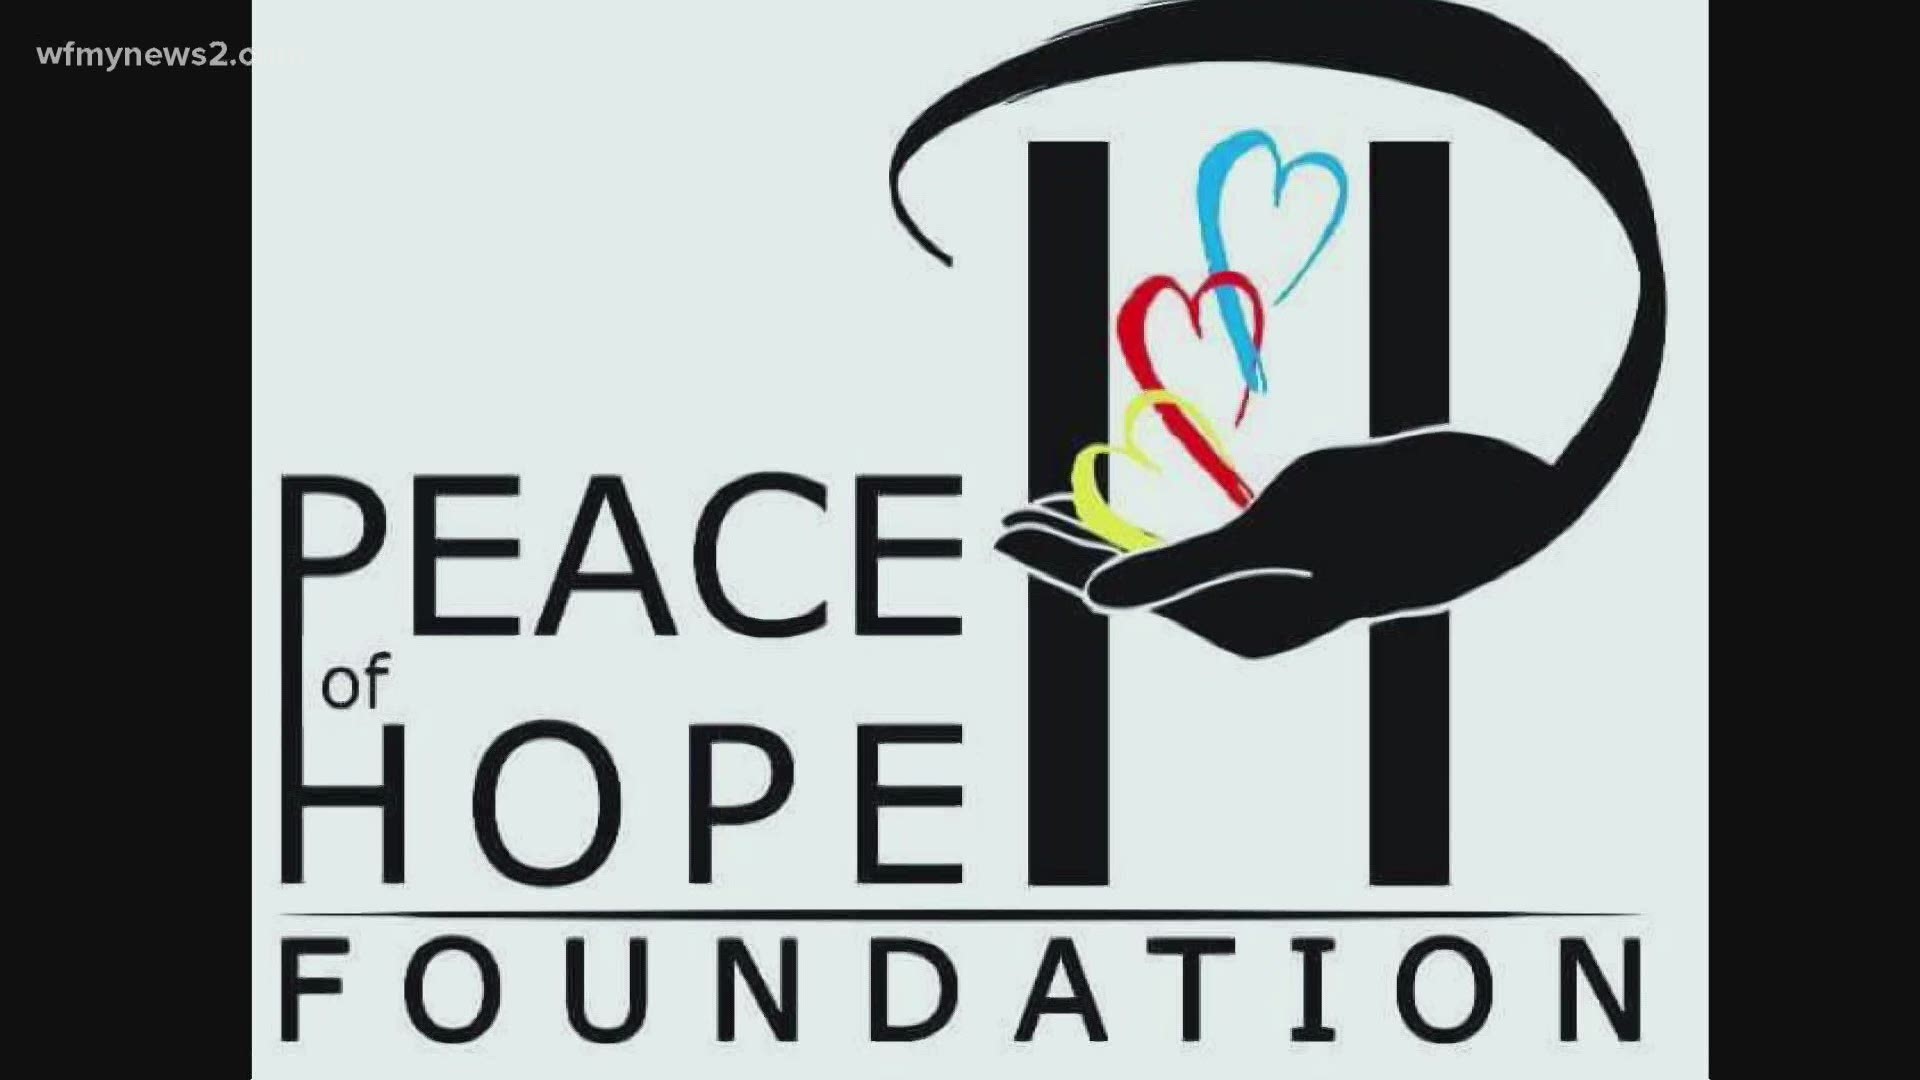 The Peace of Hope Foundation connects mental health professionals and members of our community in need of assistance.